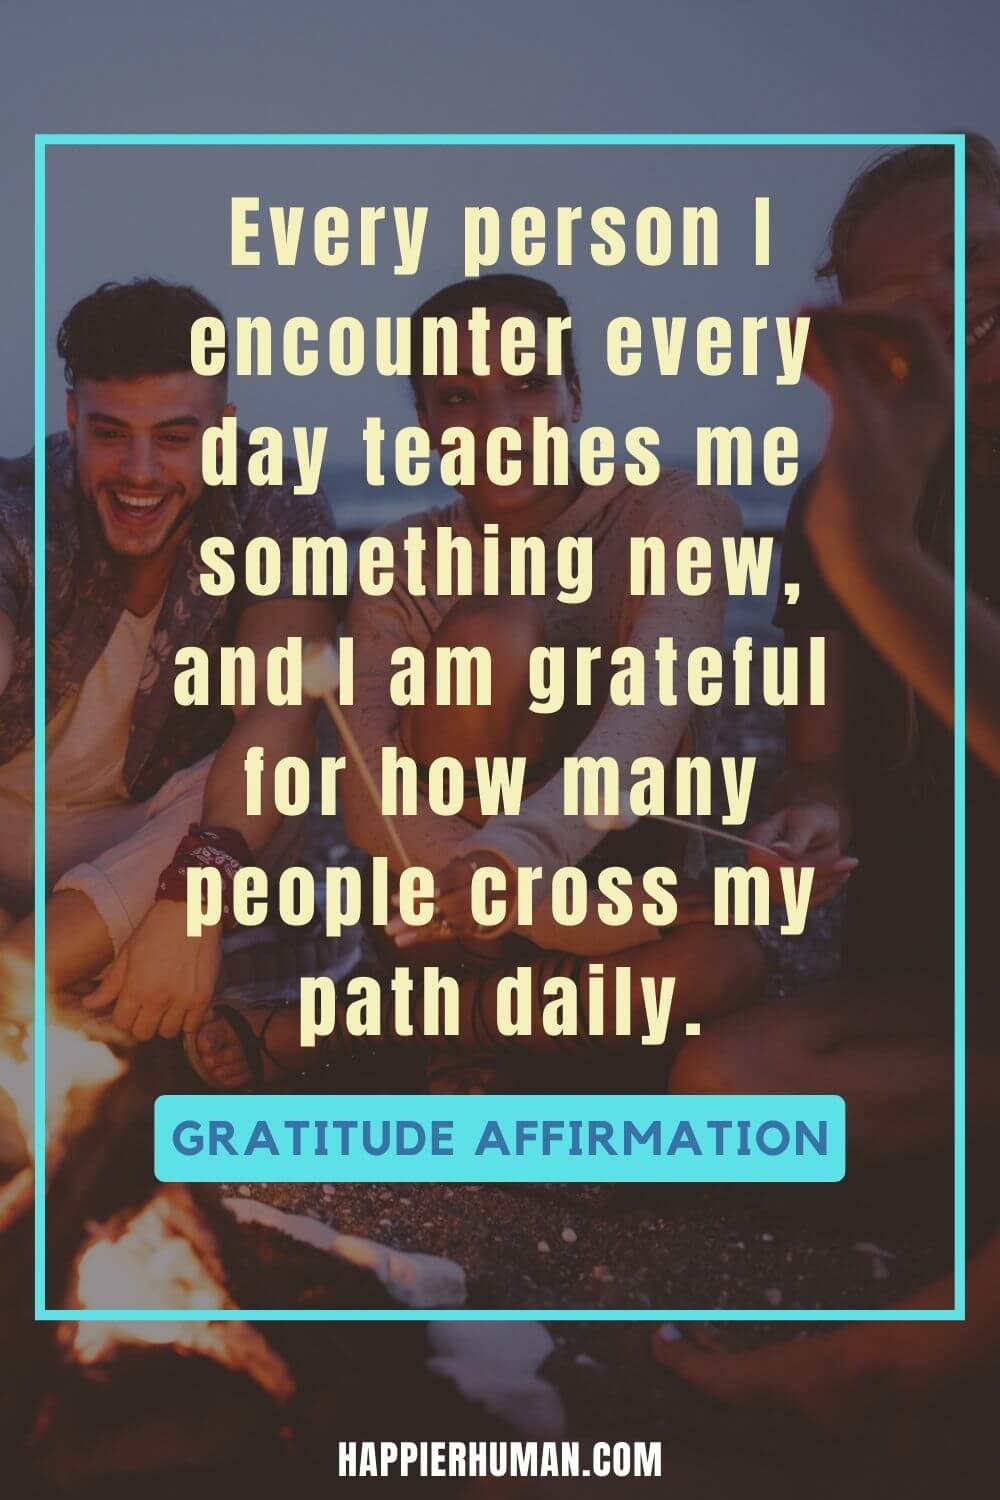 Gratitude Affirmations - Every person I encounter every day teaches me something new, and I am grateful for how many people cross my path daily. | gratitude affirmations for friends | gratitude affirmations to god | gratitude affirmations pdf